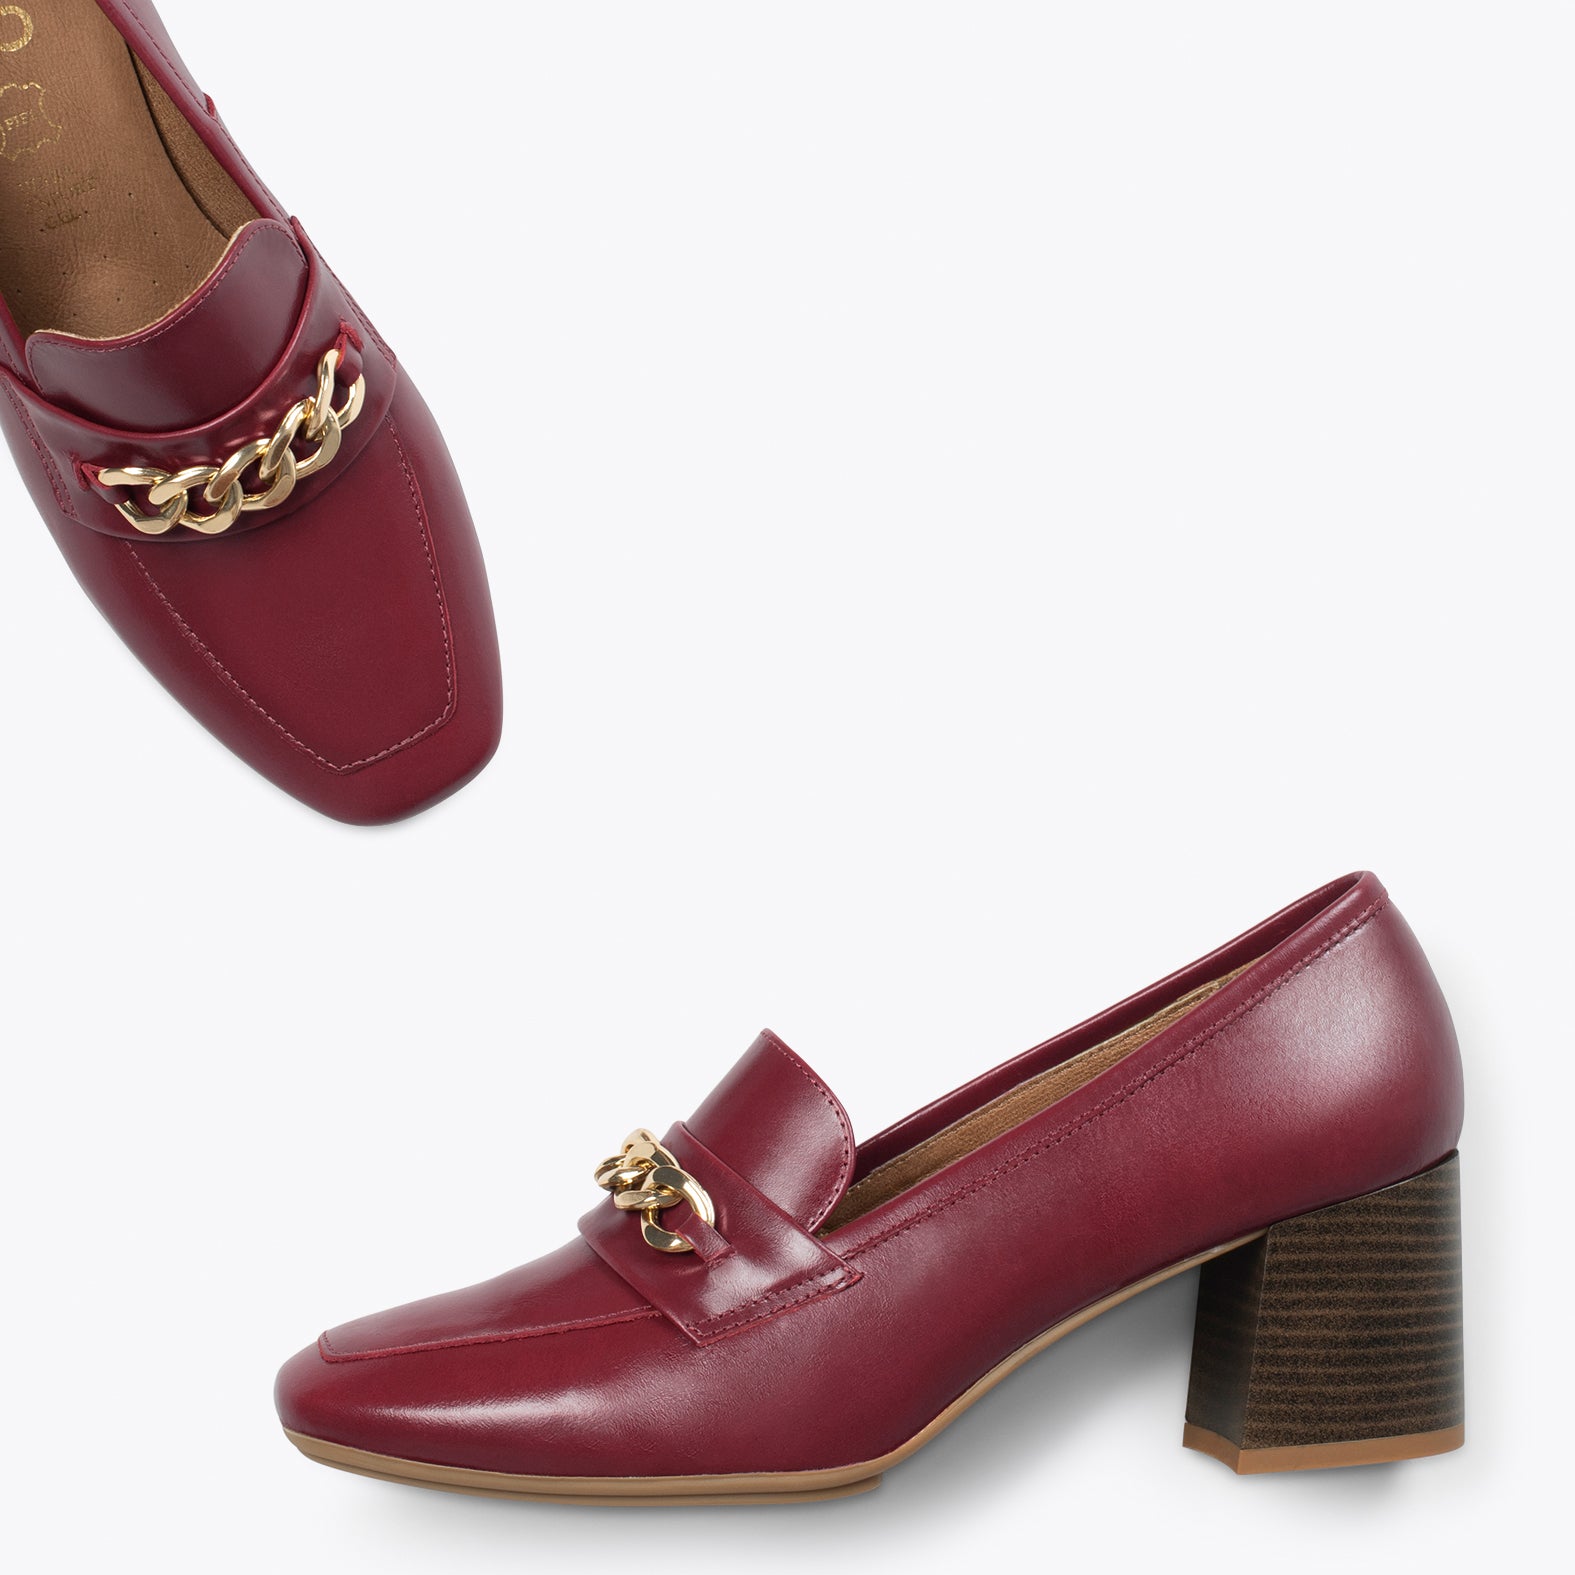 CHAIN – BURGUNDY high heel moccasin with chain detail